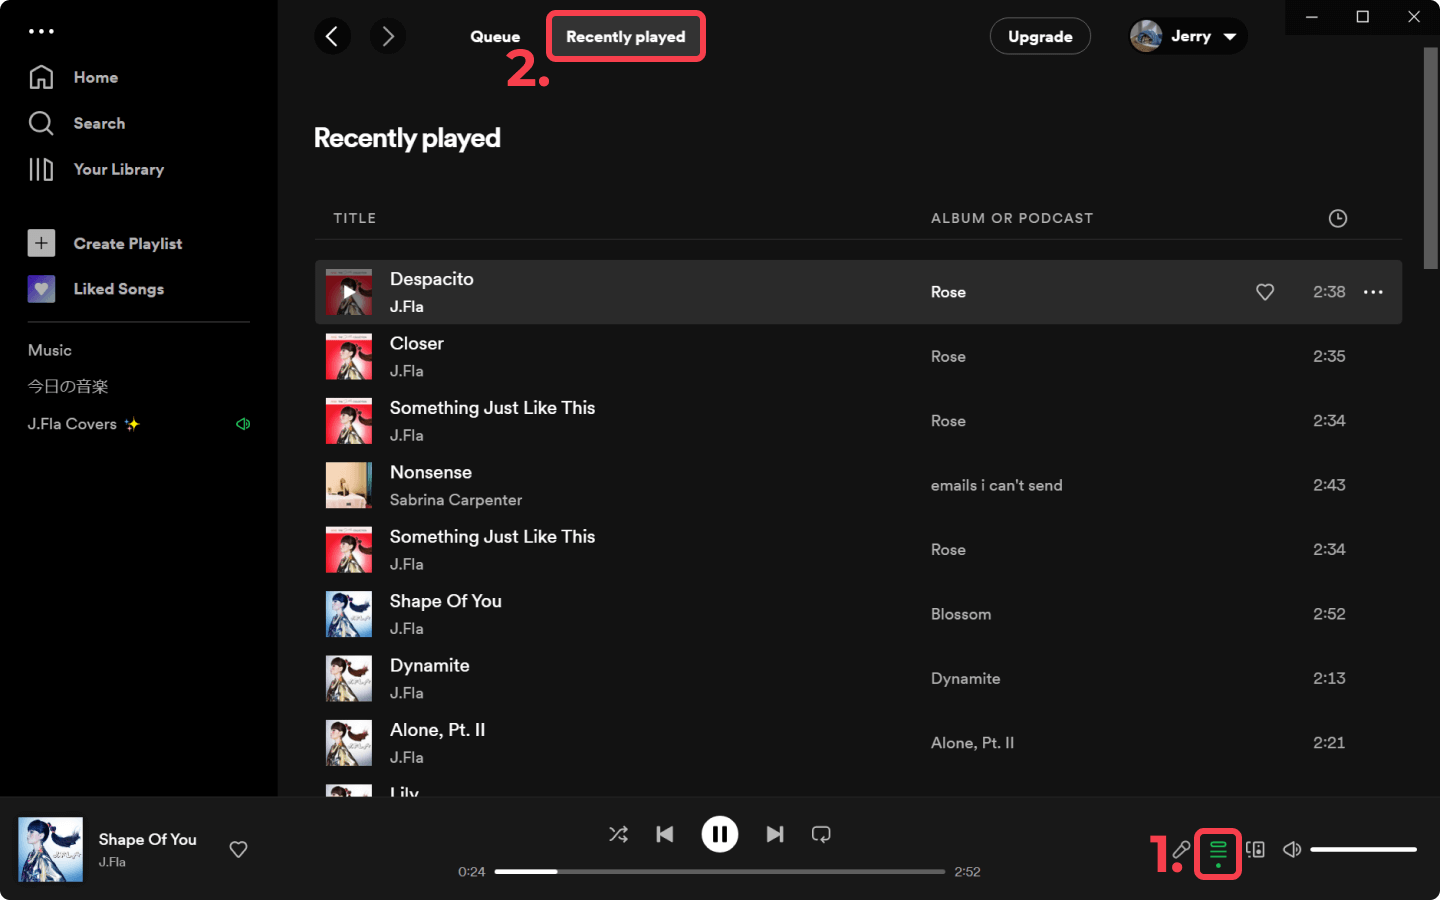 Checking The Play History on Your Spotify